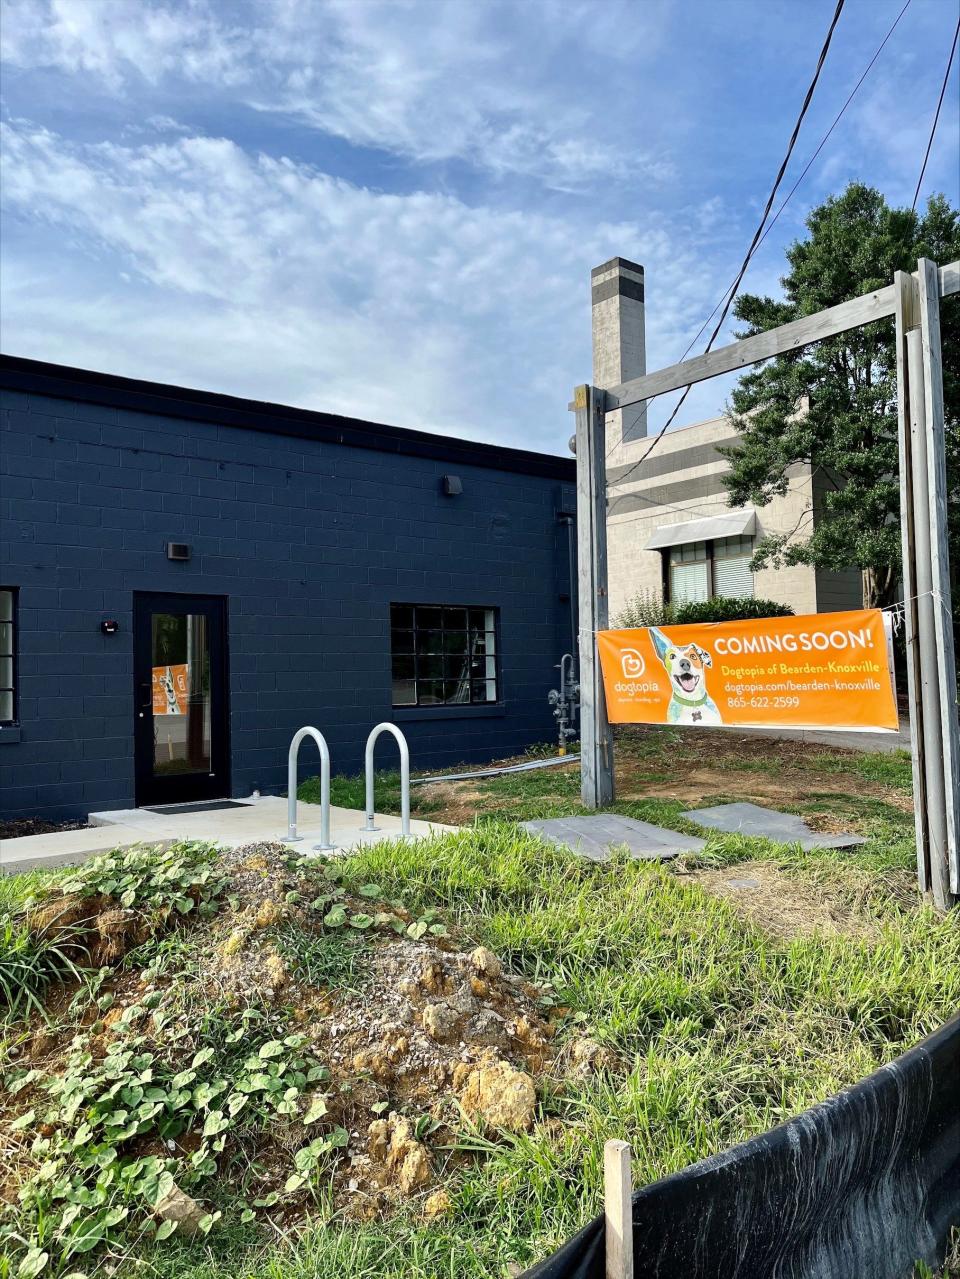 This refurbished building at 5213 Homberg Drive is scheduled to open as a Dogtopia dog day care facility in early August, with an open house scheduled for July 26.